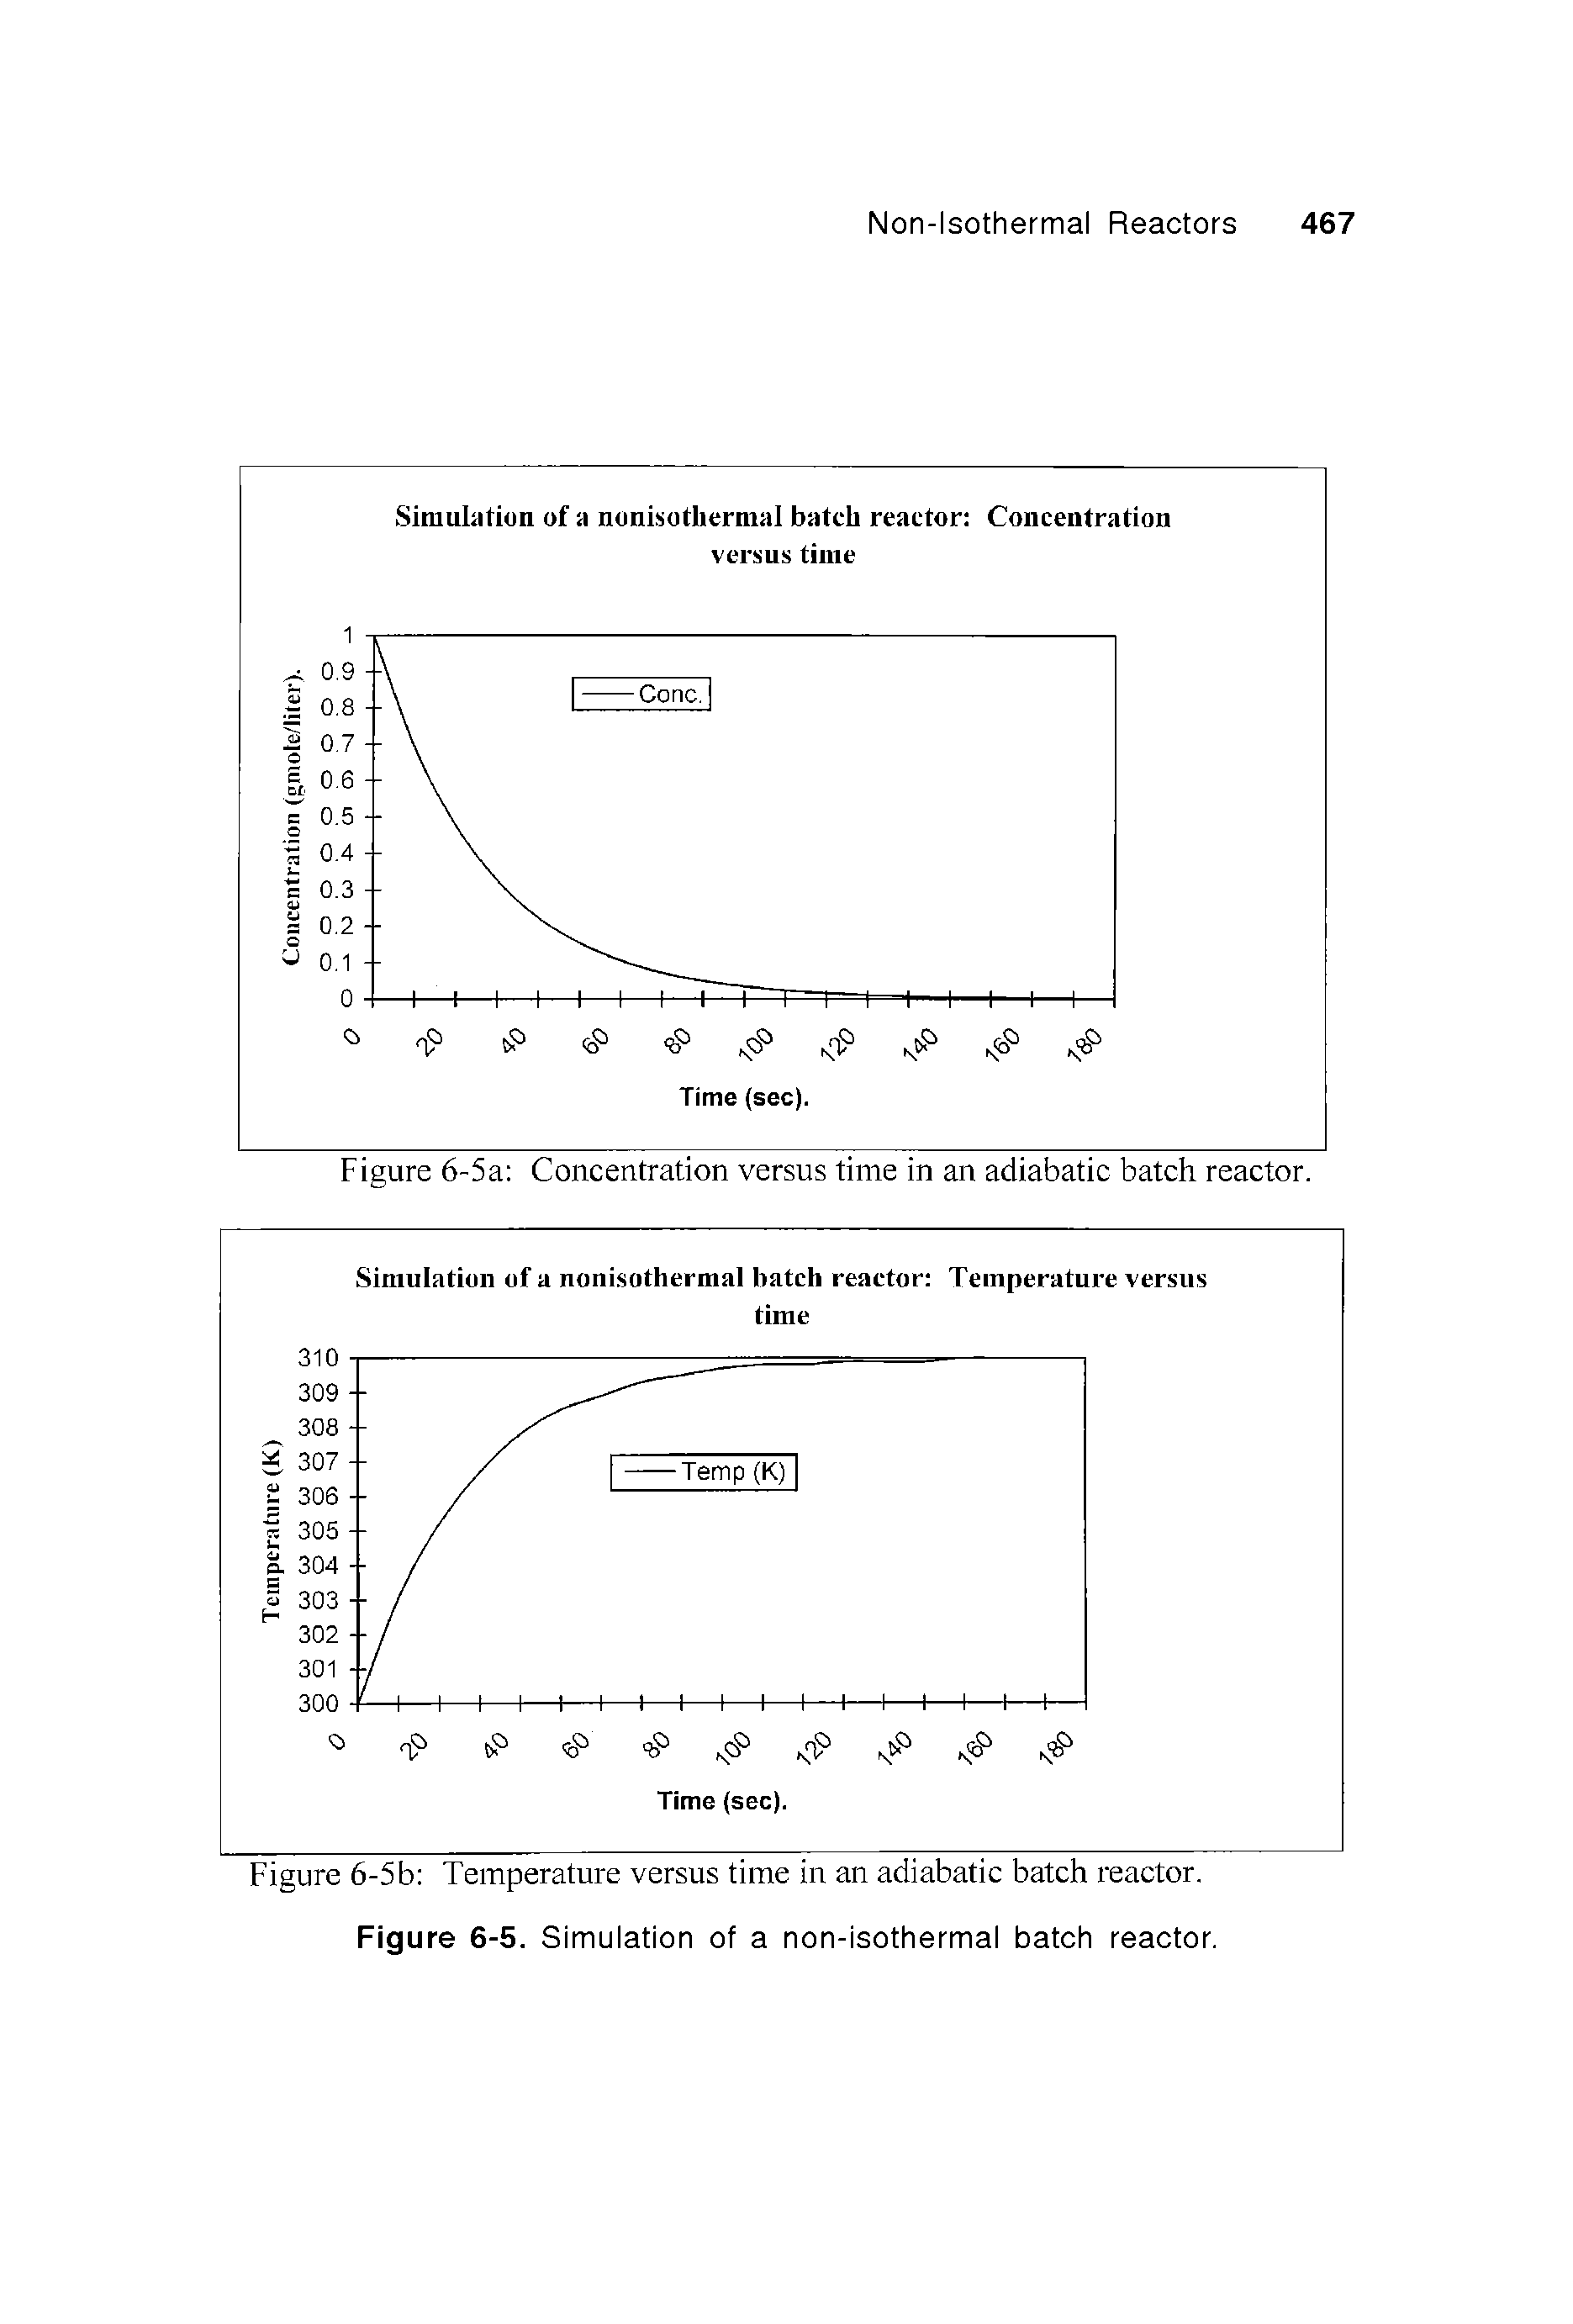 Figure 6-5a Concentration versus time in an adiabatic batch reactor.